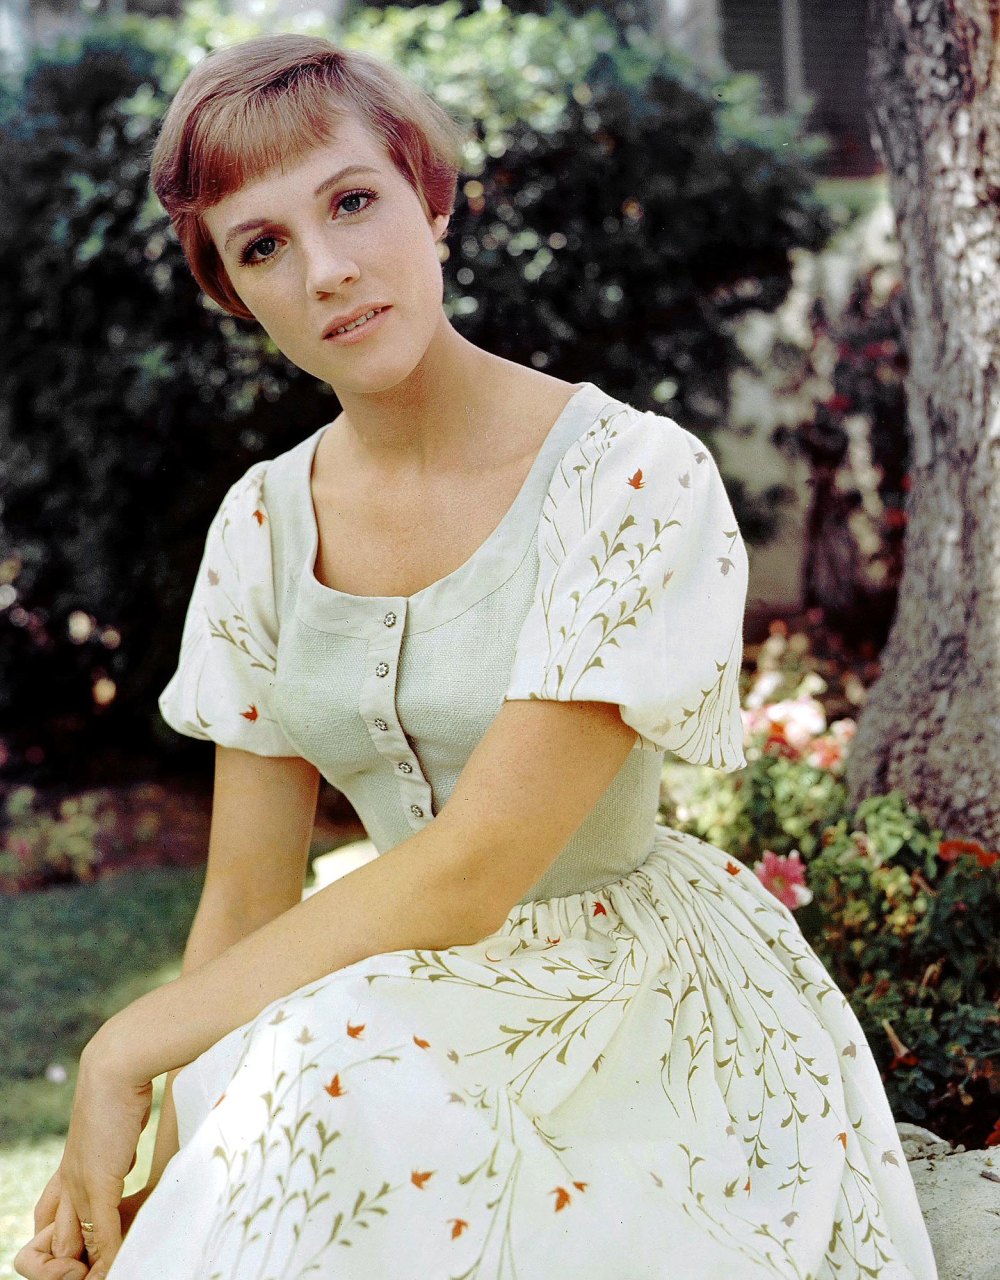 Julie Andrews Reveals Her Favorite, Least Favorite Sound of Music Songs: Watch the Exclusive Clip!